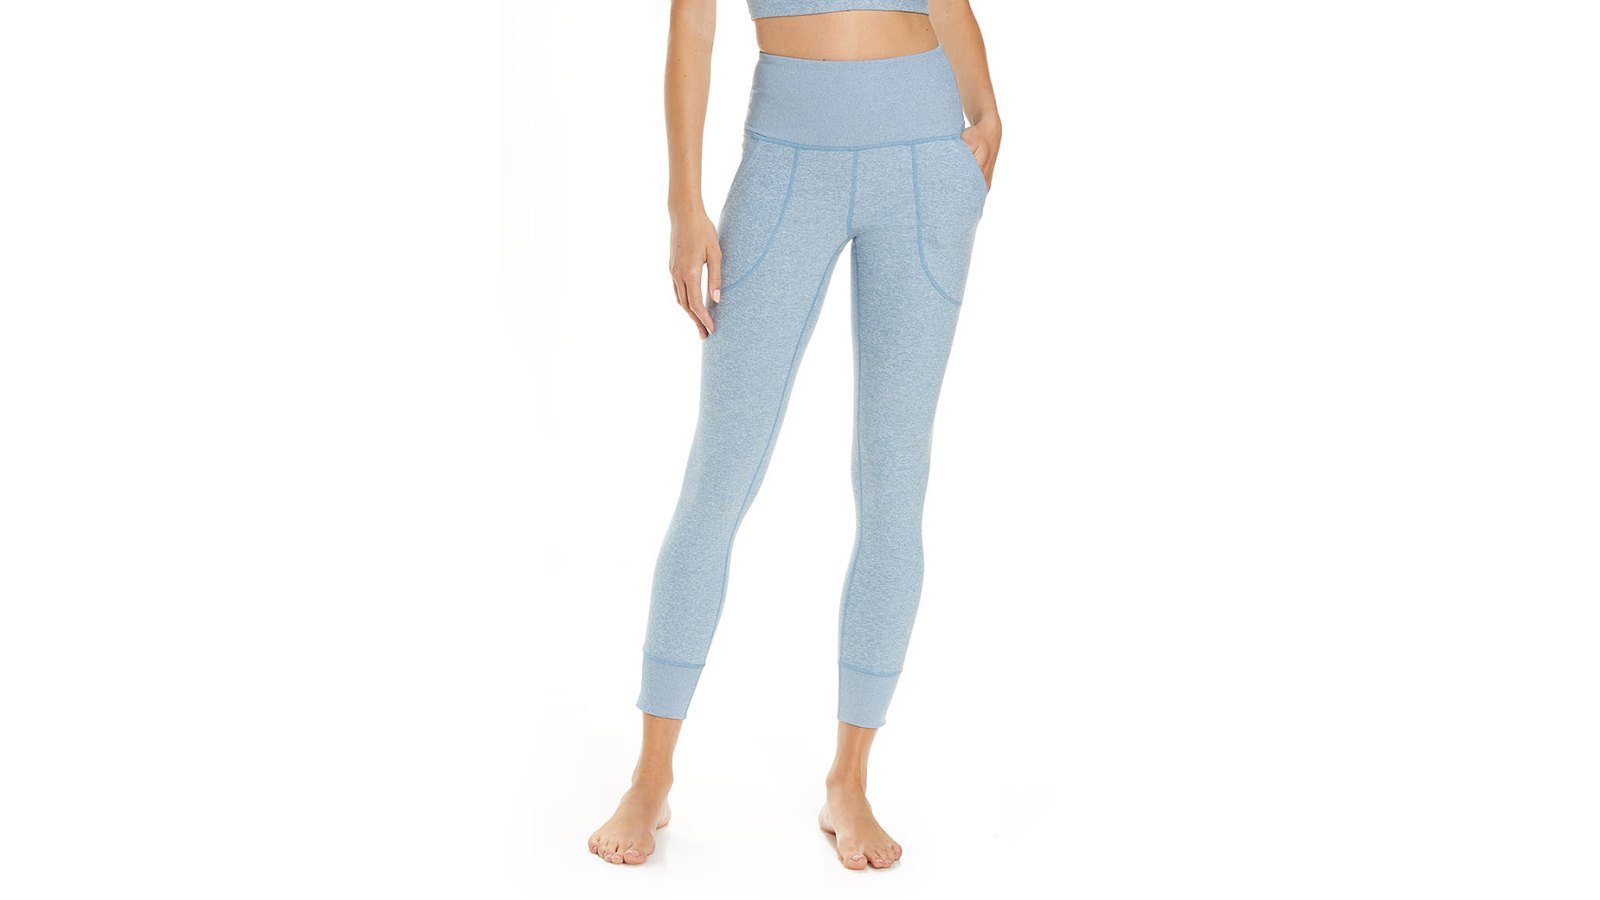 Nordstrom shoppers are obsessed with Zella leggings on sale for